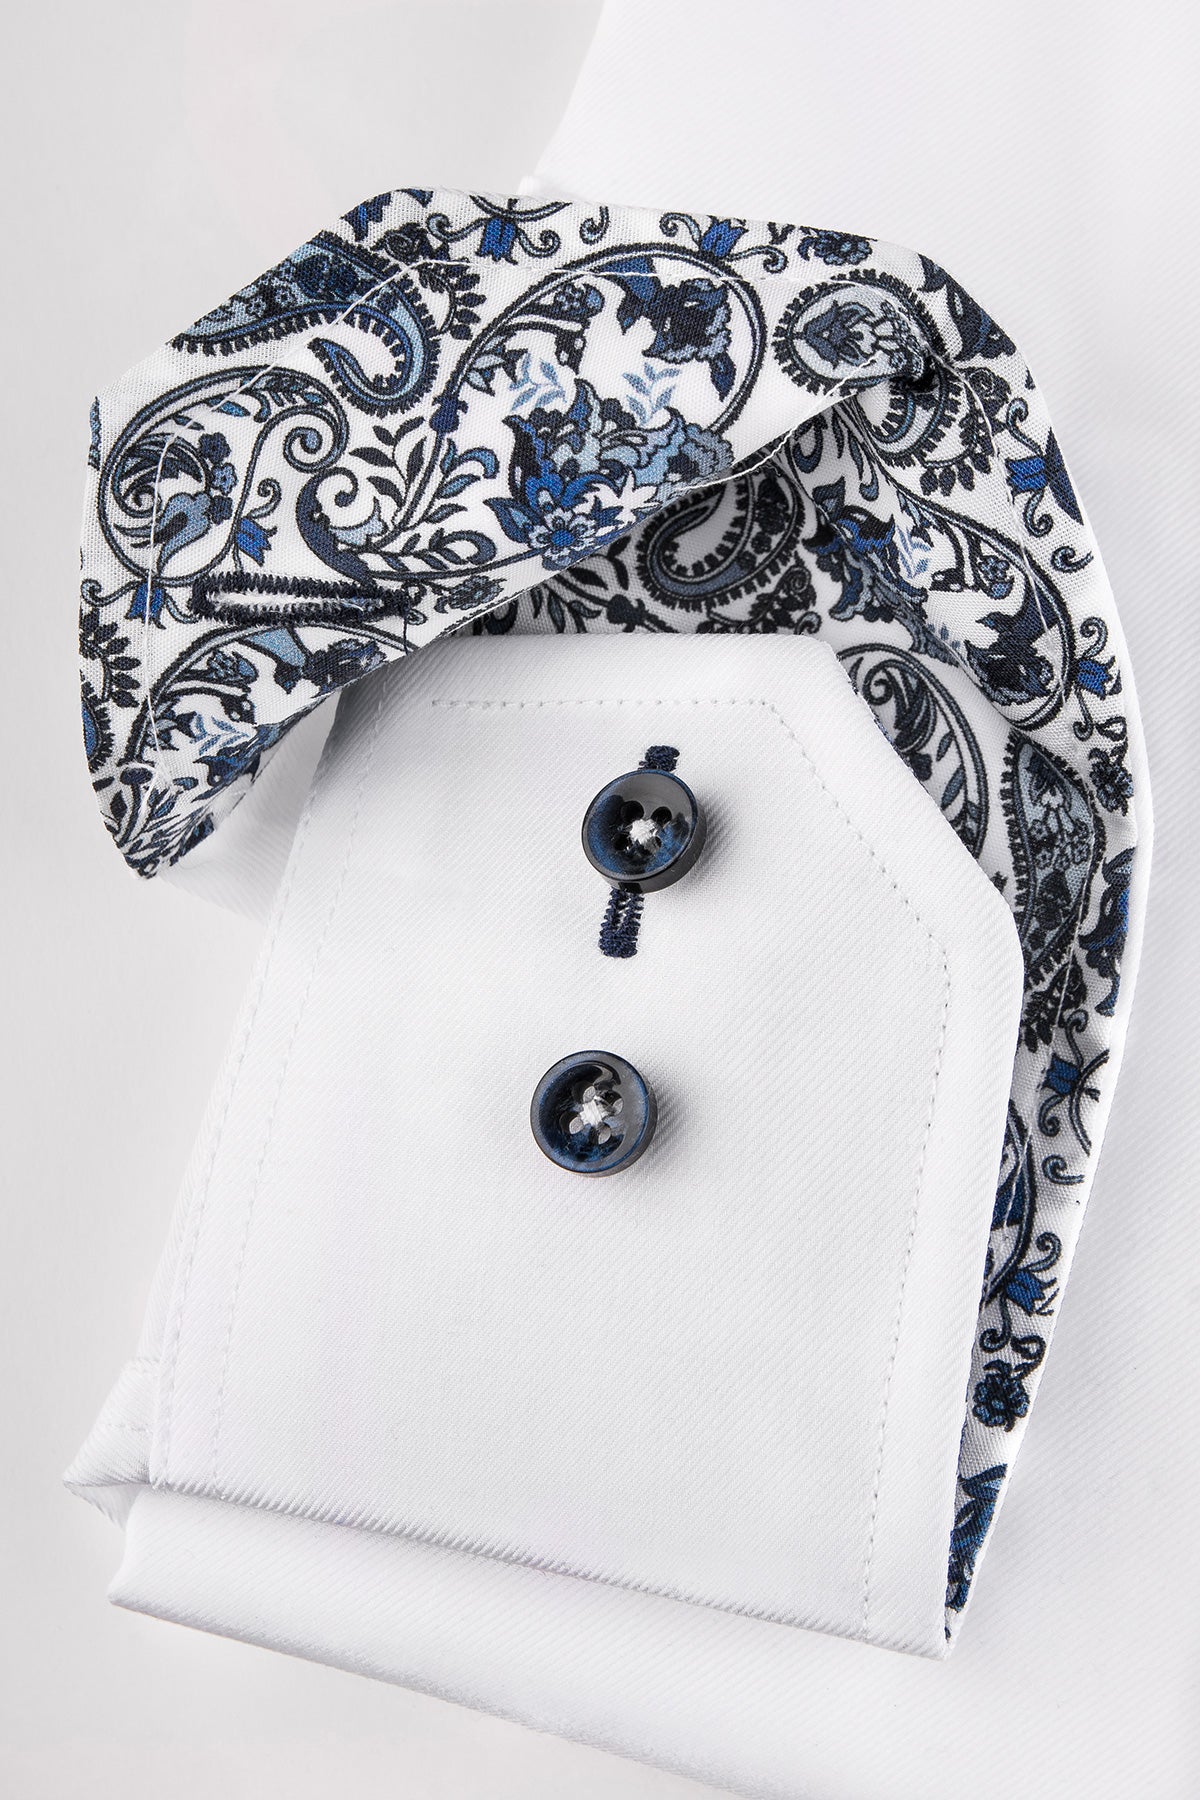 White slim fit shirt with blue paisley details